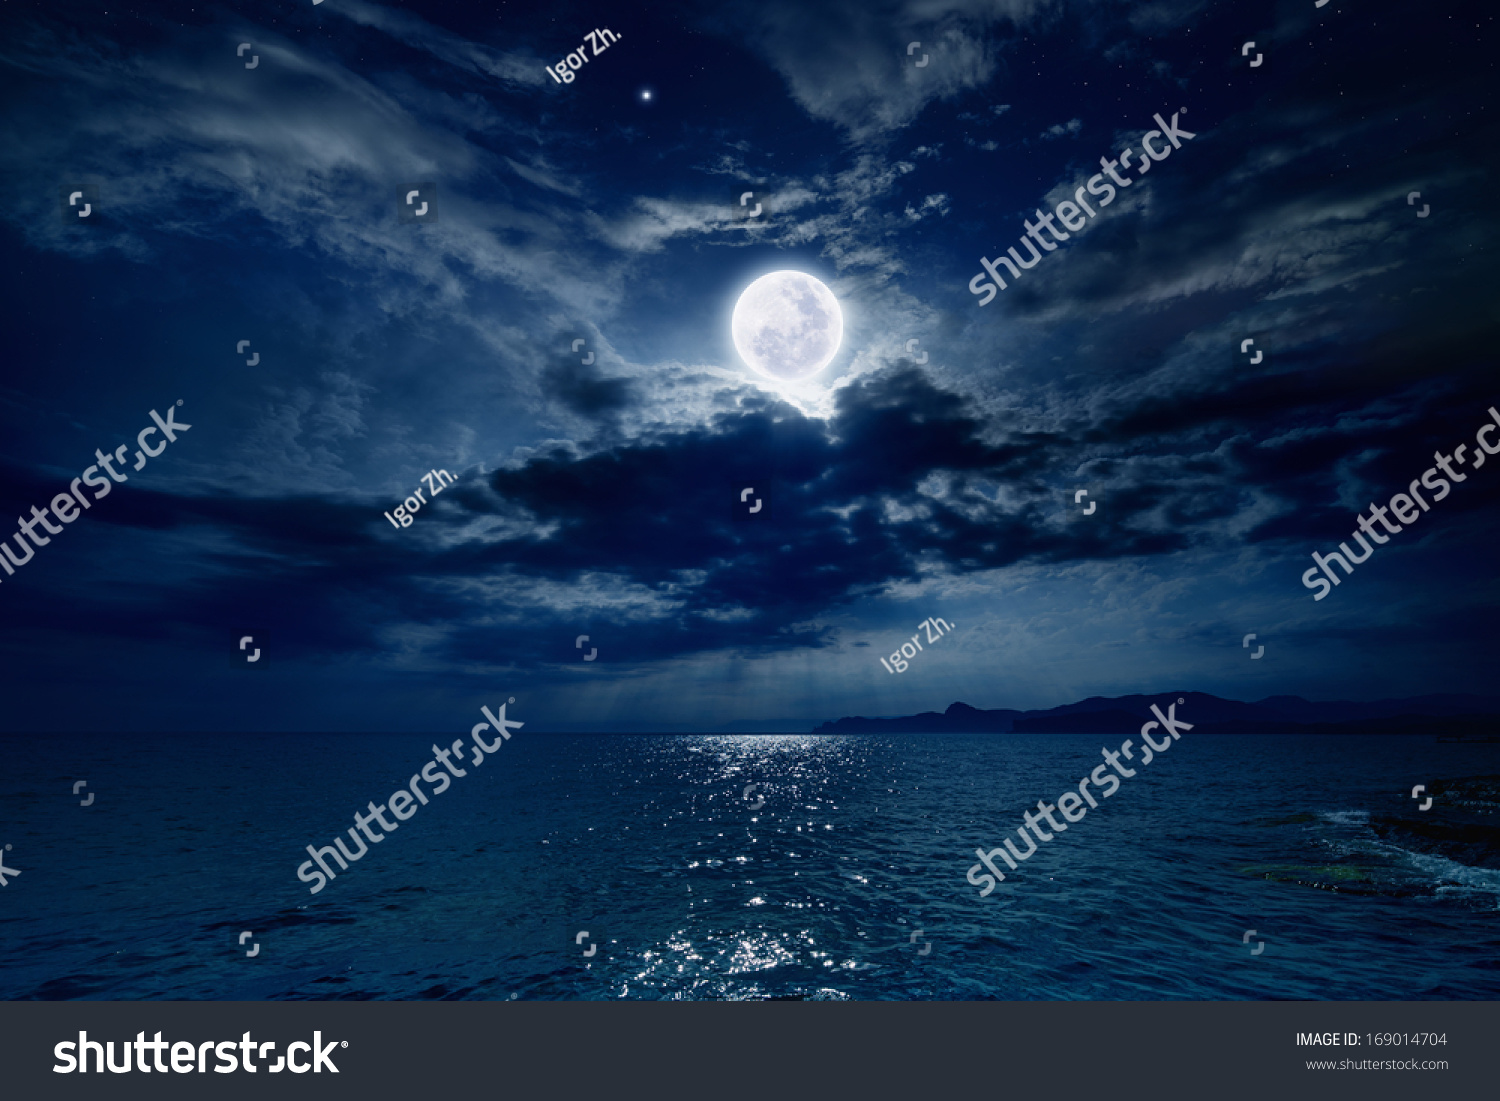 Night Sky With Full Moon And Reflection In Sea, Stars, Beautiful Clouds ...